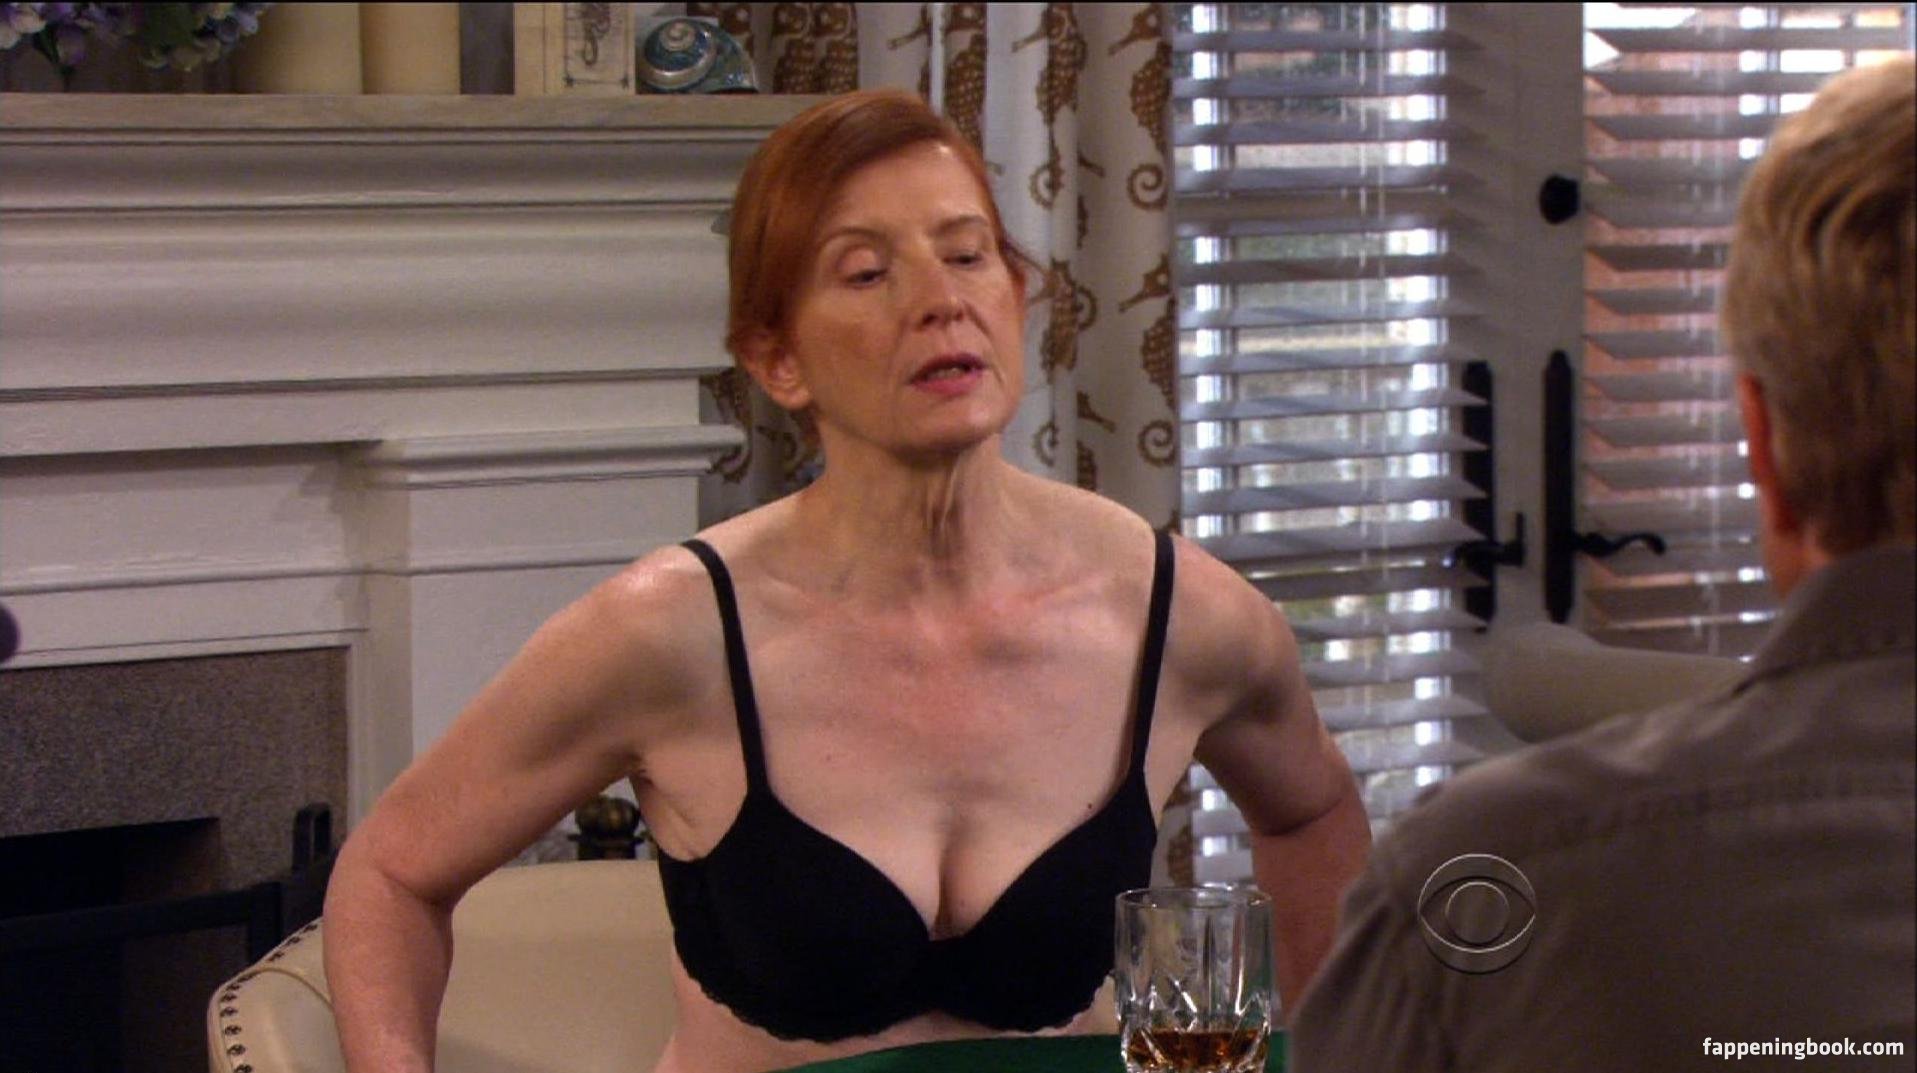 Frances Conroy Nude, The Fappening - Photo #191767 - FappeningBook 